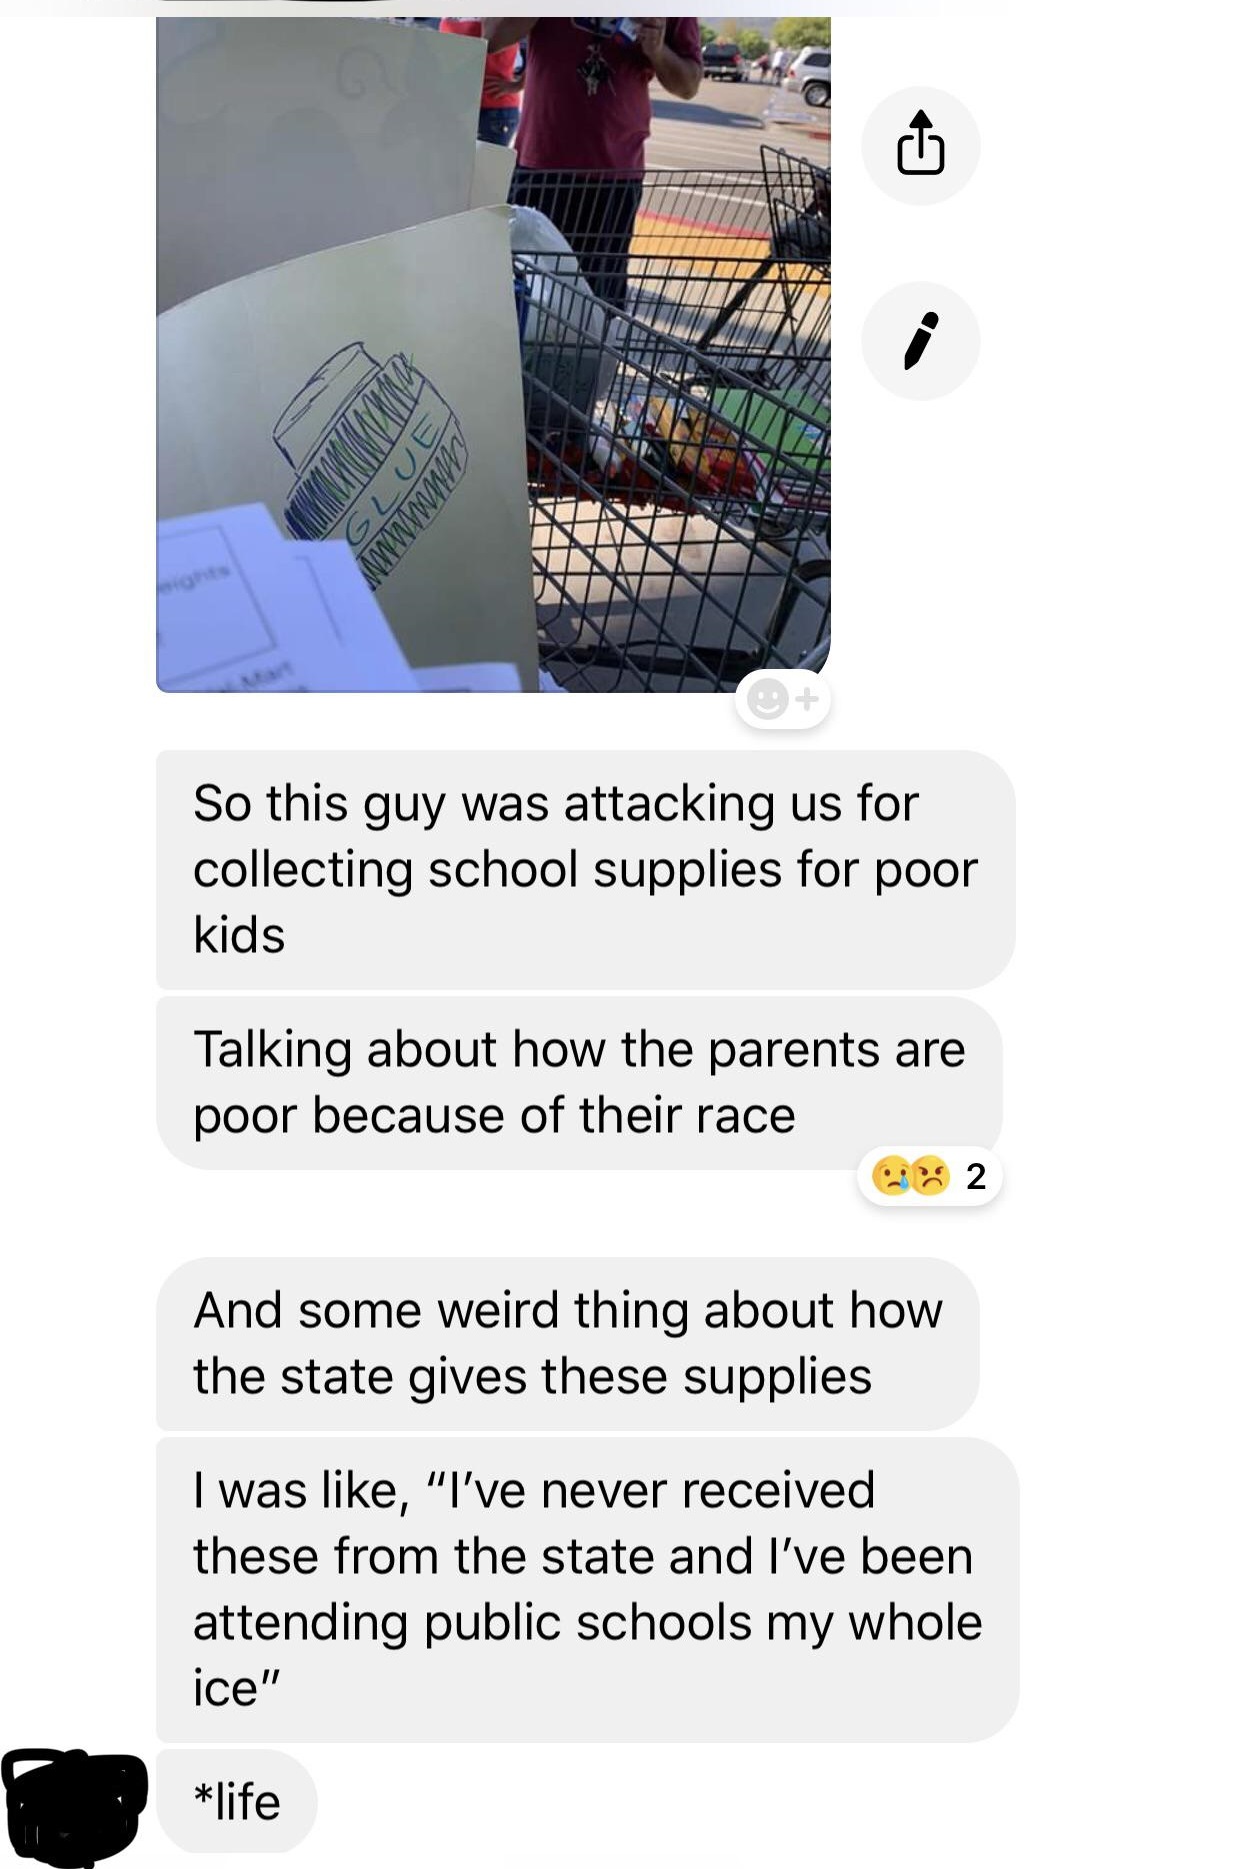 Statud Mwwmwm So this guy was attacking us for collecting school supplies for poor kids Talking about how the parents are poor because of their race 2 And some weird thing about how the state gives these supplies I was , I've never received these